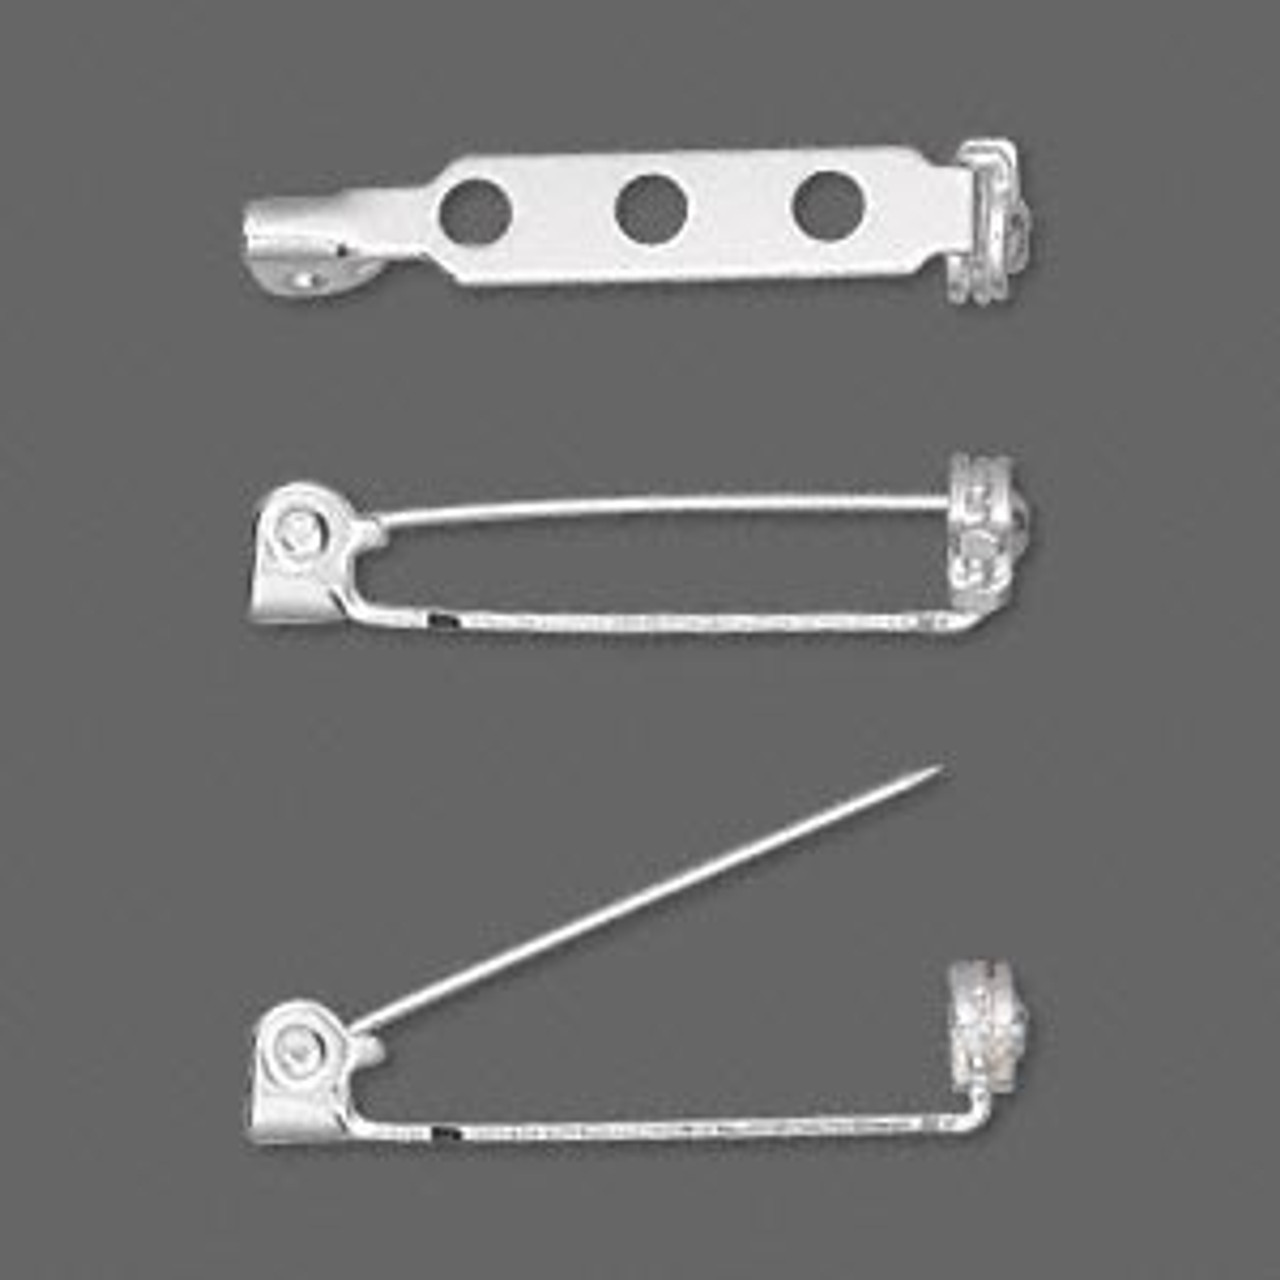 Pin Back Silver Plated Steel - 1 inch with locking bar - 6pk